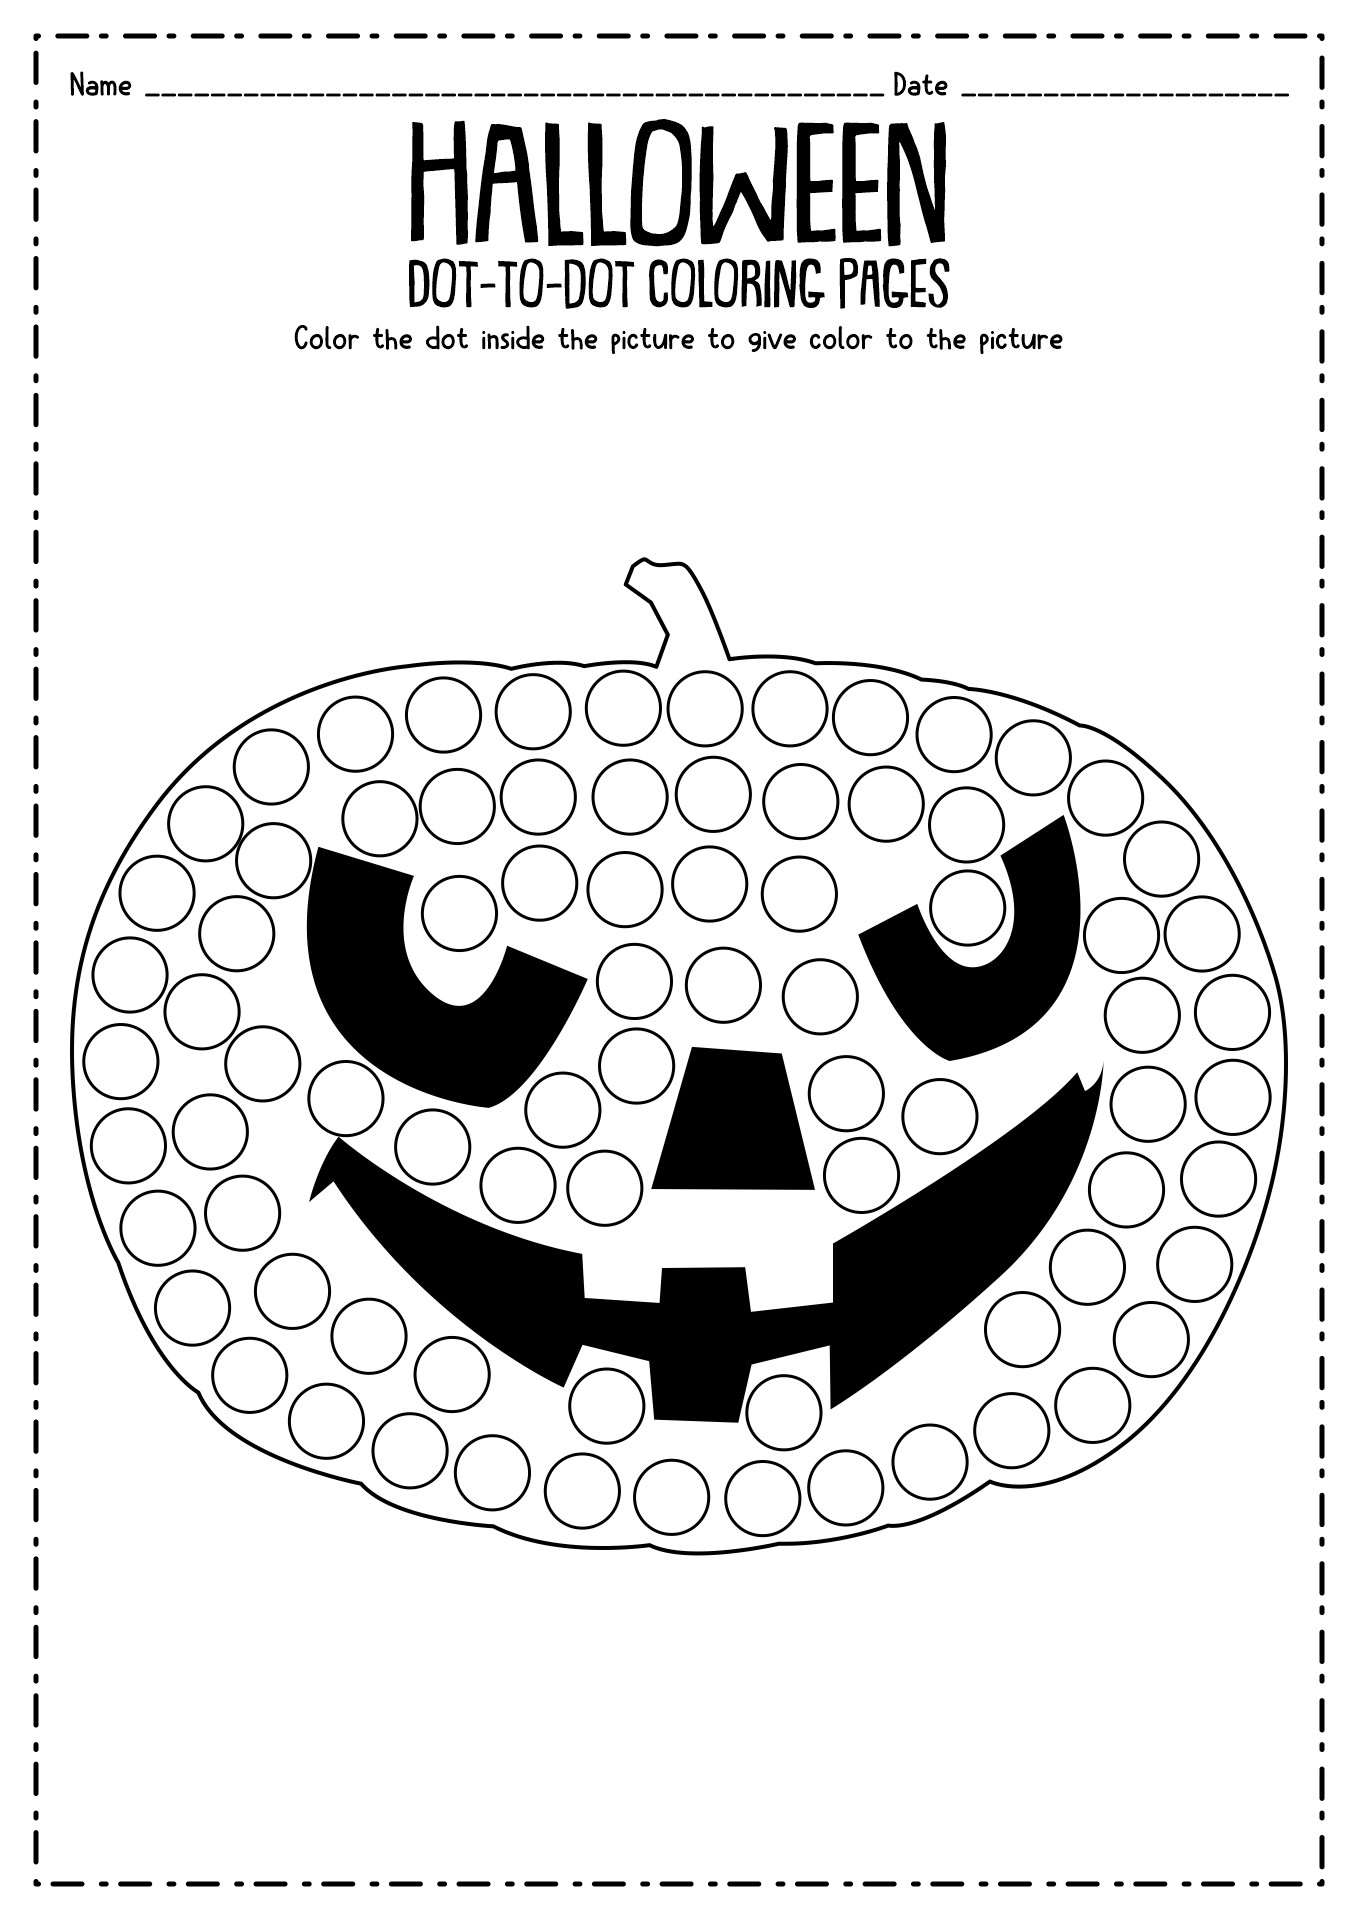 Free Printable Halloween Dot to Dot Coloring Pages